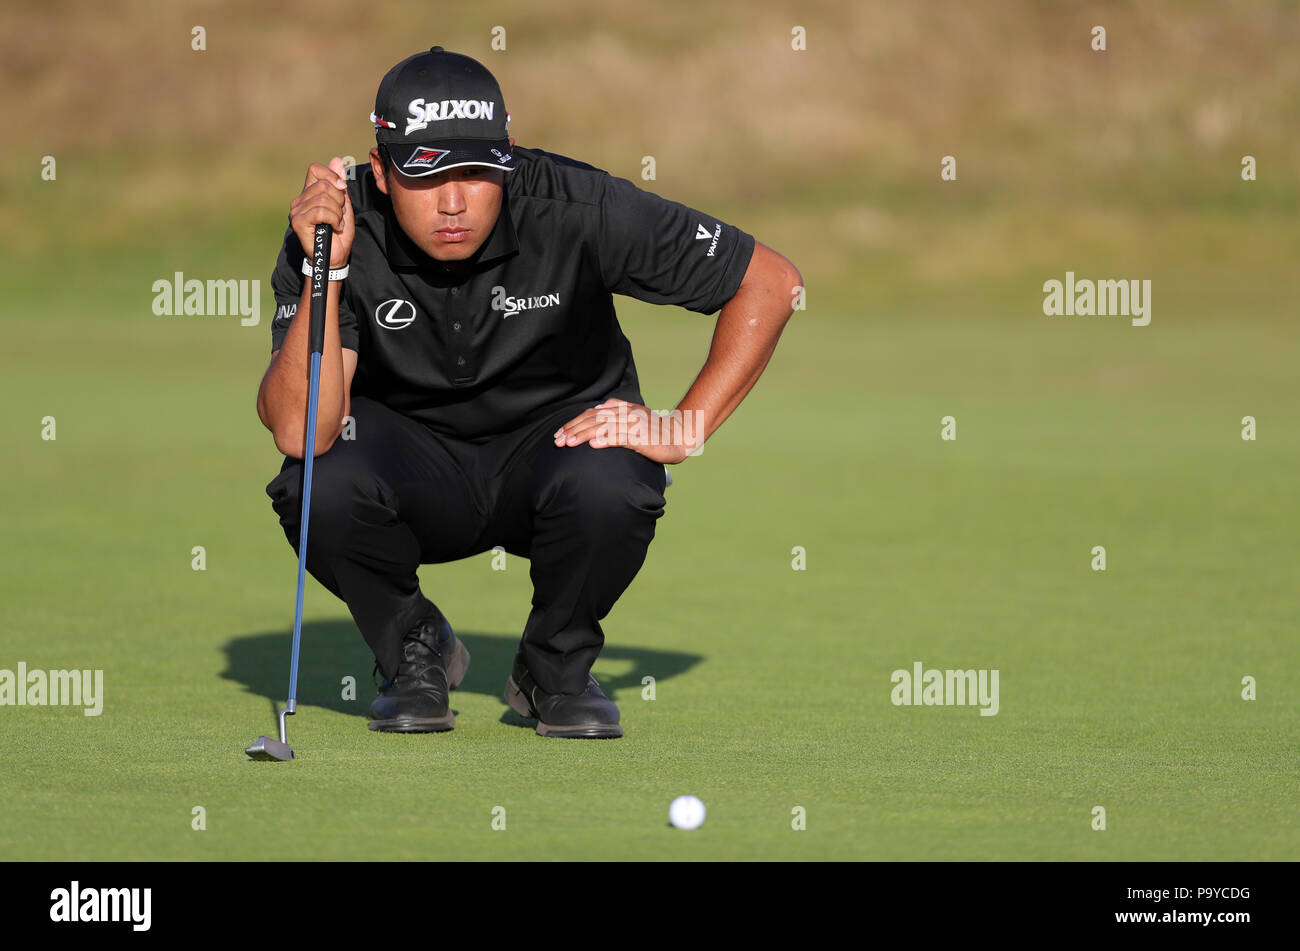 Japan's Hideki Matsuyama lines up a putt on the 15th during day one of The Open Championship 2018 at Carnoustie Golf Links, Angus. PRESS ASSOCIATION Photo. Picture date: Thursday July 19, 2018. See PA story GOLF Open. Photo credit should read: Richard Sellers/PA Wire. RESTRICTIONS: Editorial use only. No commercial use. Still image use only. The Open Championship logo and clear link to The Open website (TheOpen.com) to be included on website publishing. Stock Photo